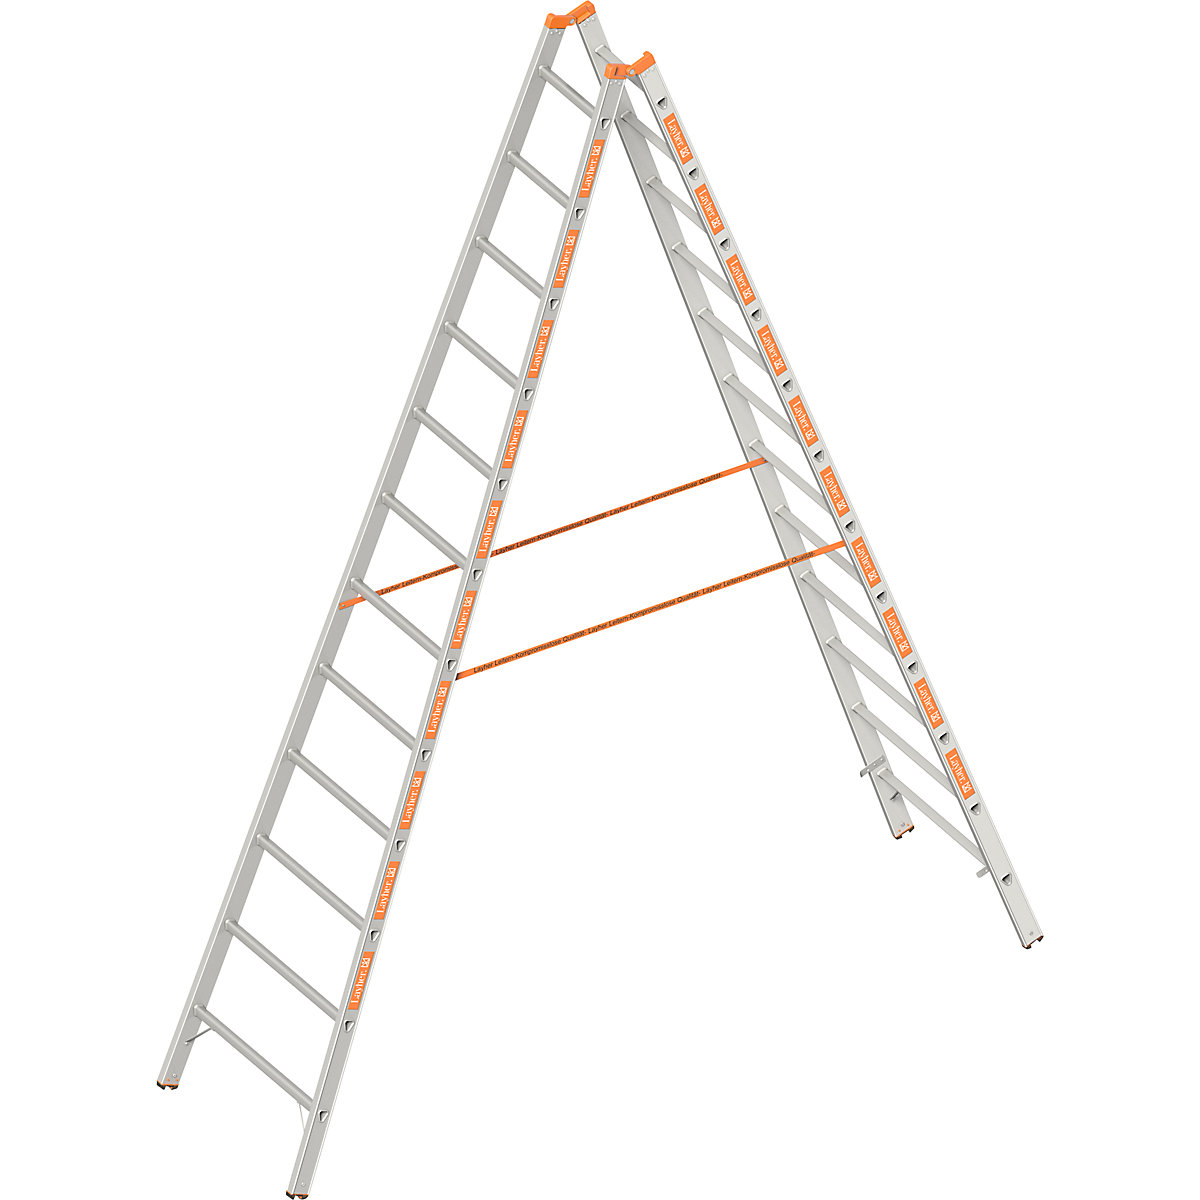 Double sided rung ladder – Layher, double sided access, 2 x 12 rungs-11